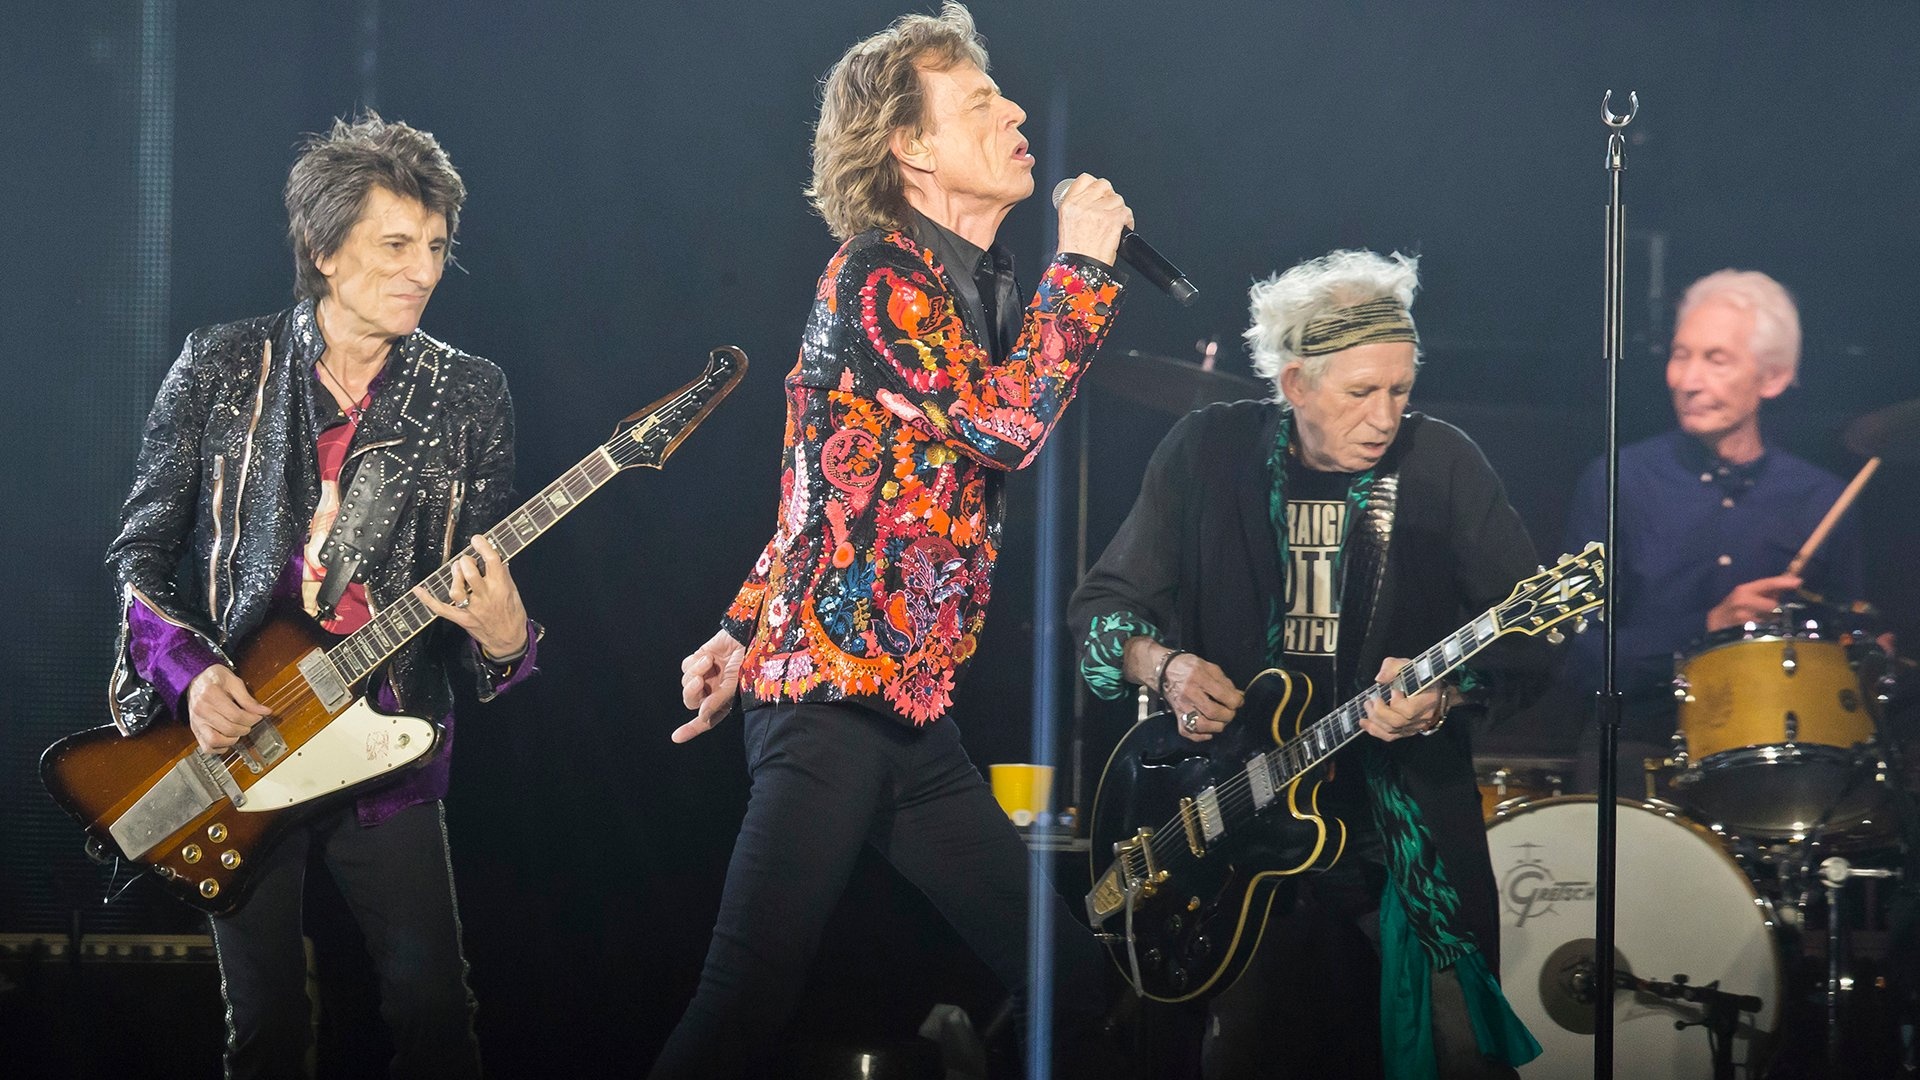 Rolling Stones' North American tour, Exciting start in Chicago, Rocking the stage, Music extravaganza, 1920x1080 Full HD Desktop